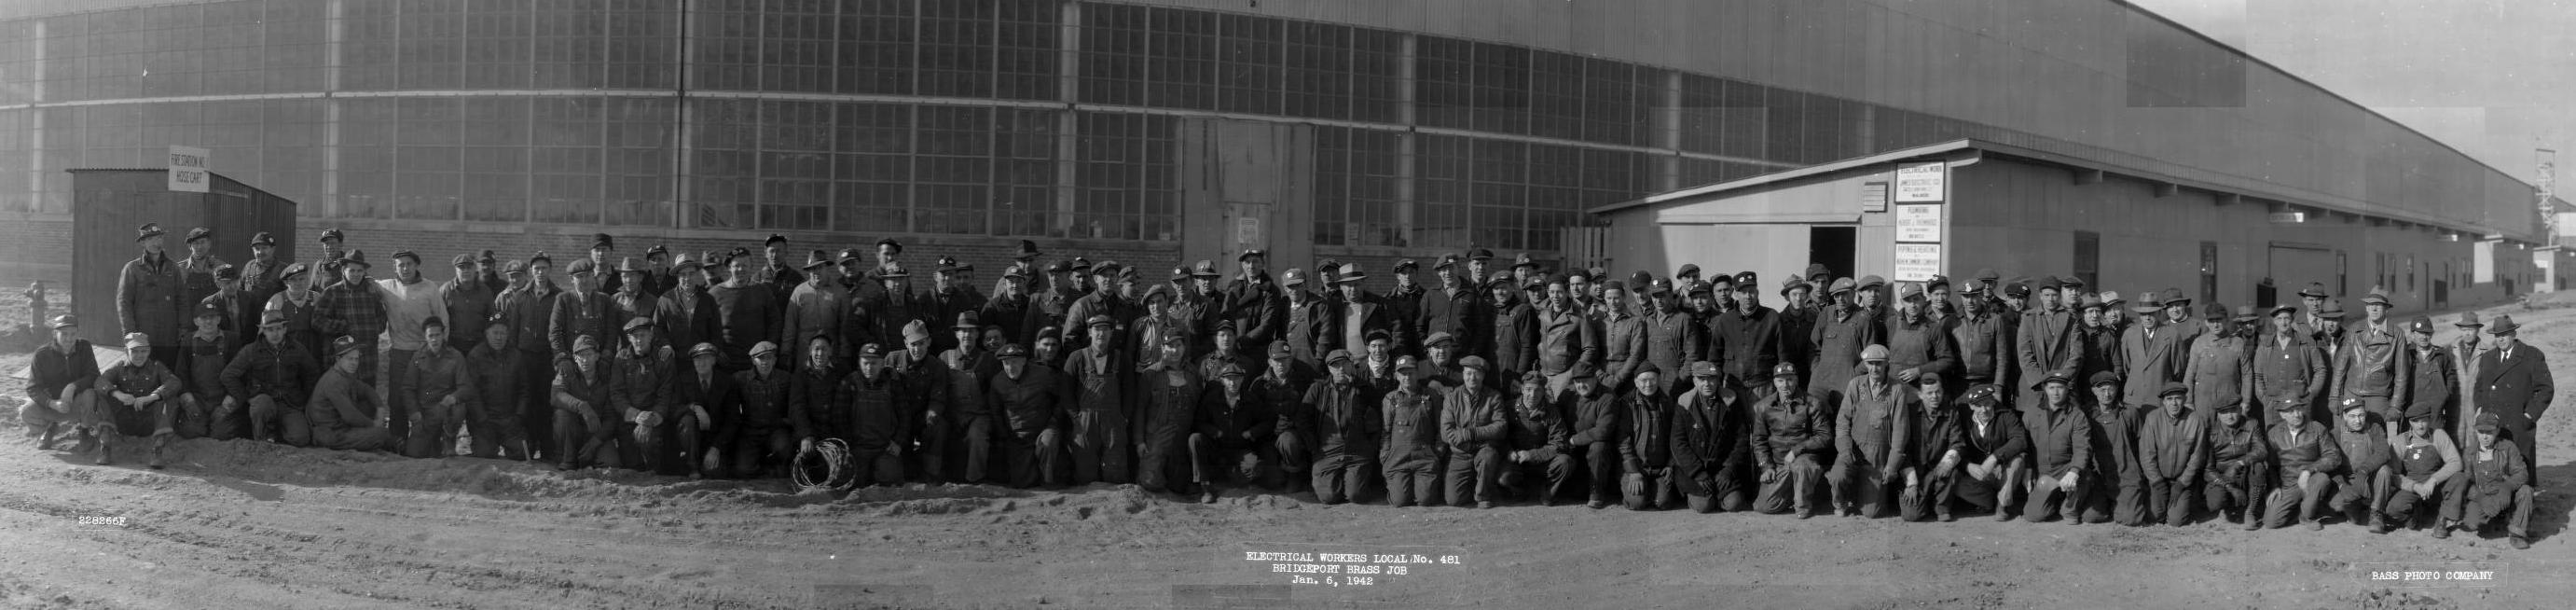 A group photo of electrical workers in front of a building.